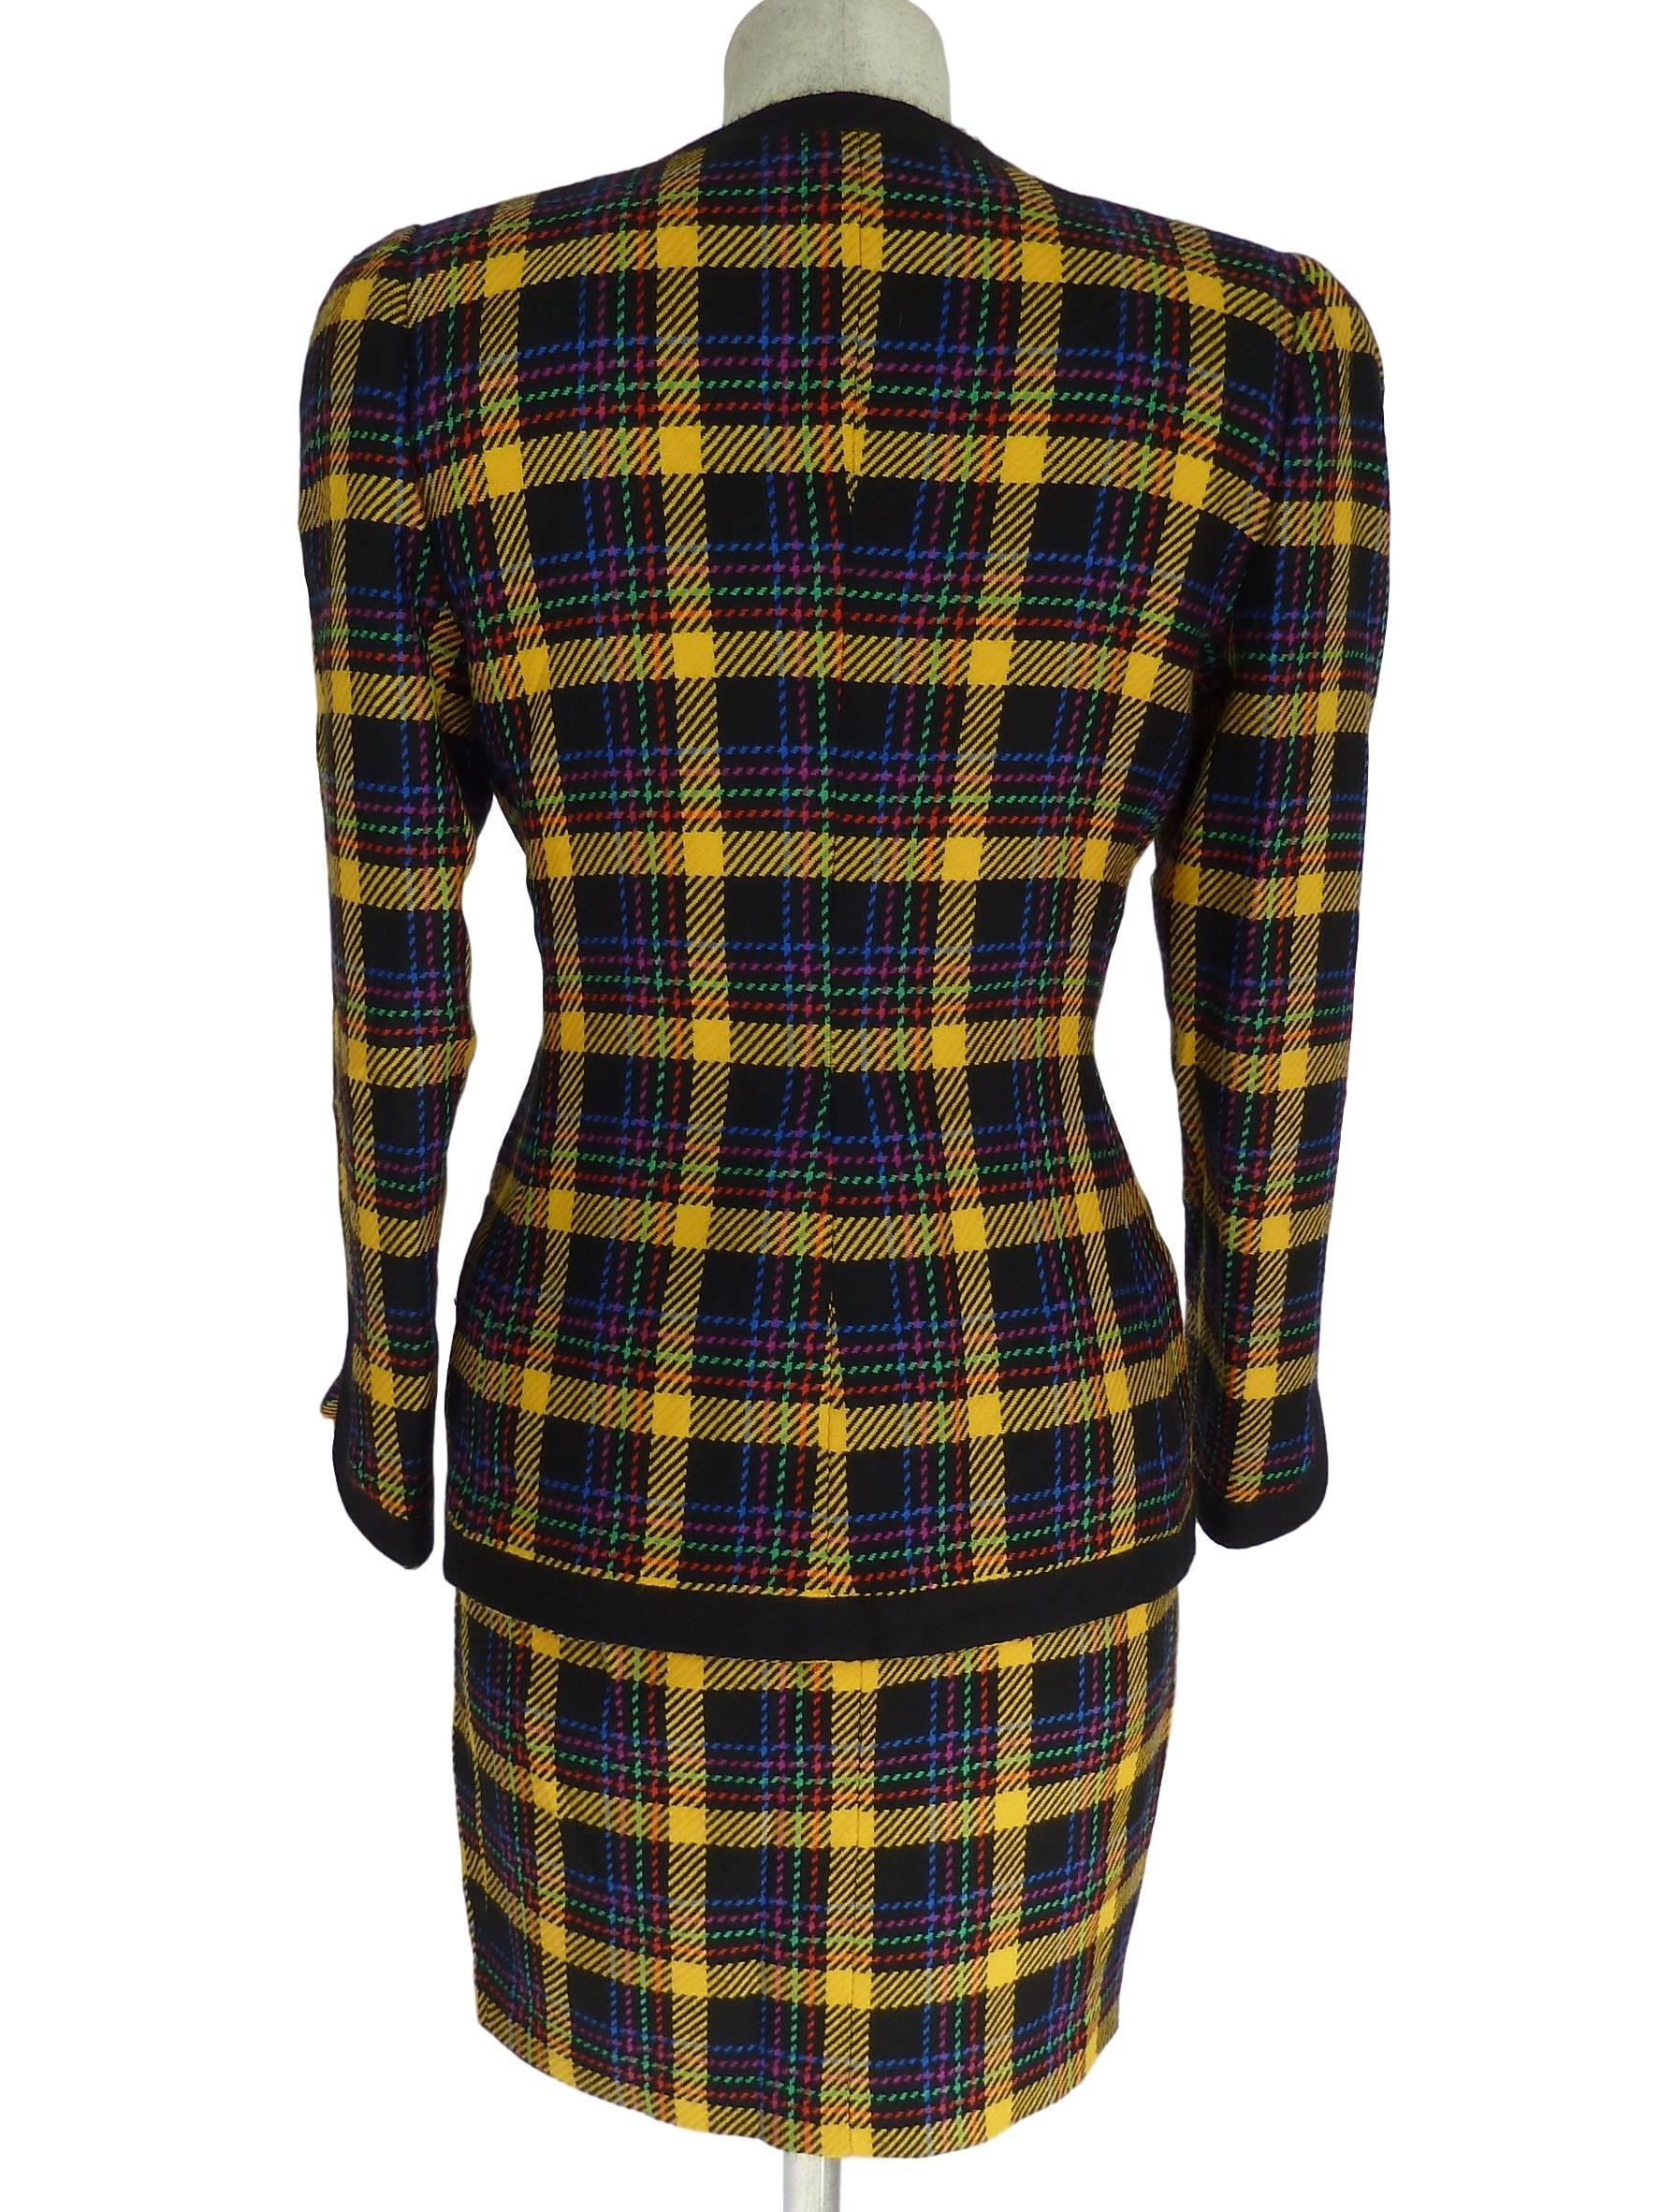 Amazing Gai Mattiolo vintage suit 80s of rare beauty, composed of jacket and skirt, check wool, decorative buttons shaped golden bow with swarovski stones.

Size: 42 IT 8 US 10 UK

Shoulders: 42 cm
Bust/Chest: 45 m
Total lenght: 63 cm
Sleeves: 55